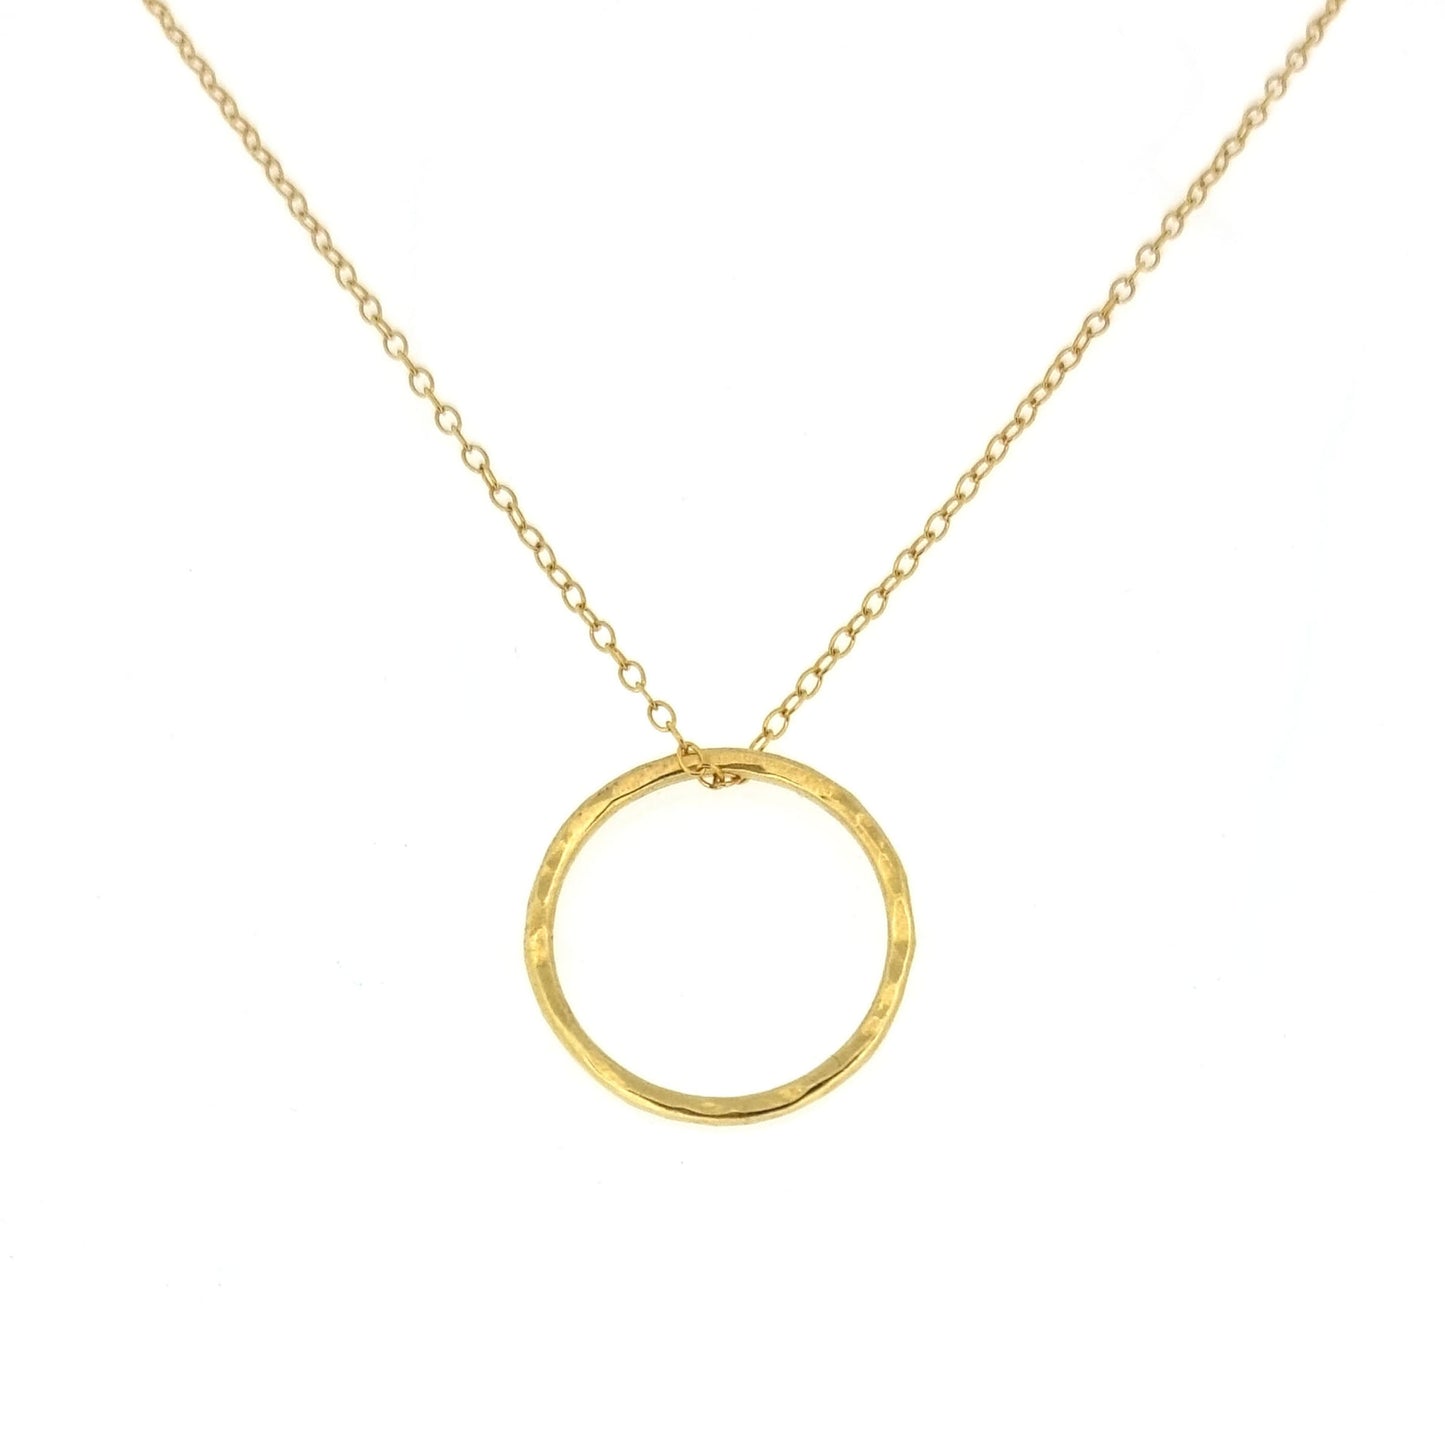 Yellow gold vermeil open circle pendant with hammered texture on a yellow gold vermeil chain. Large